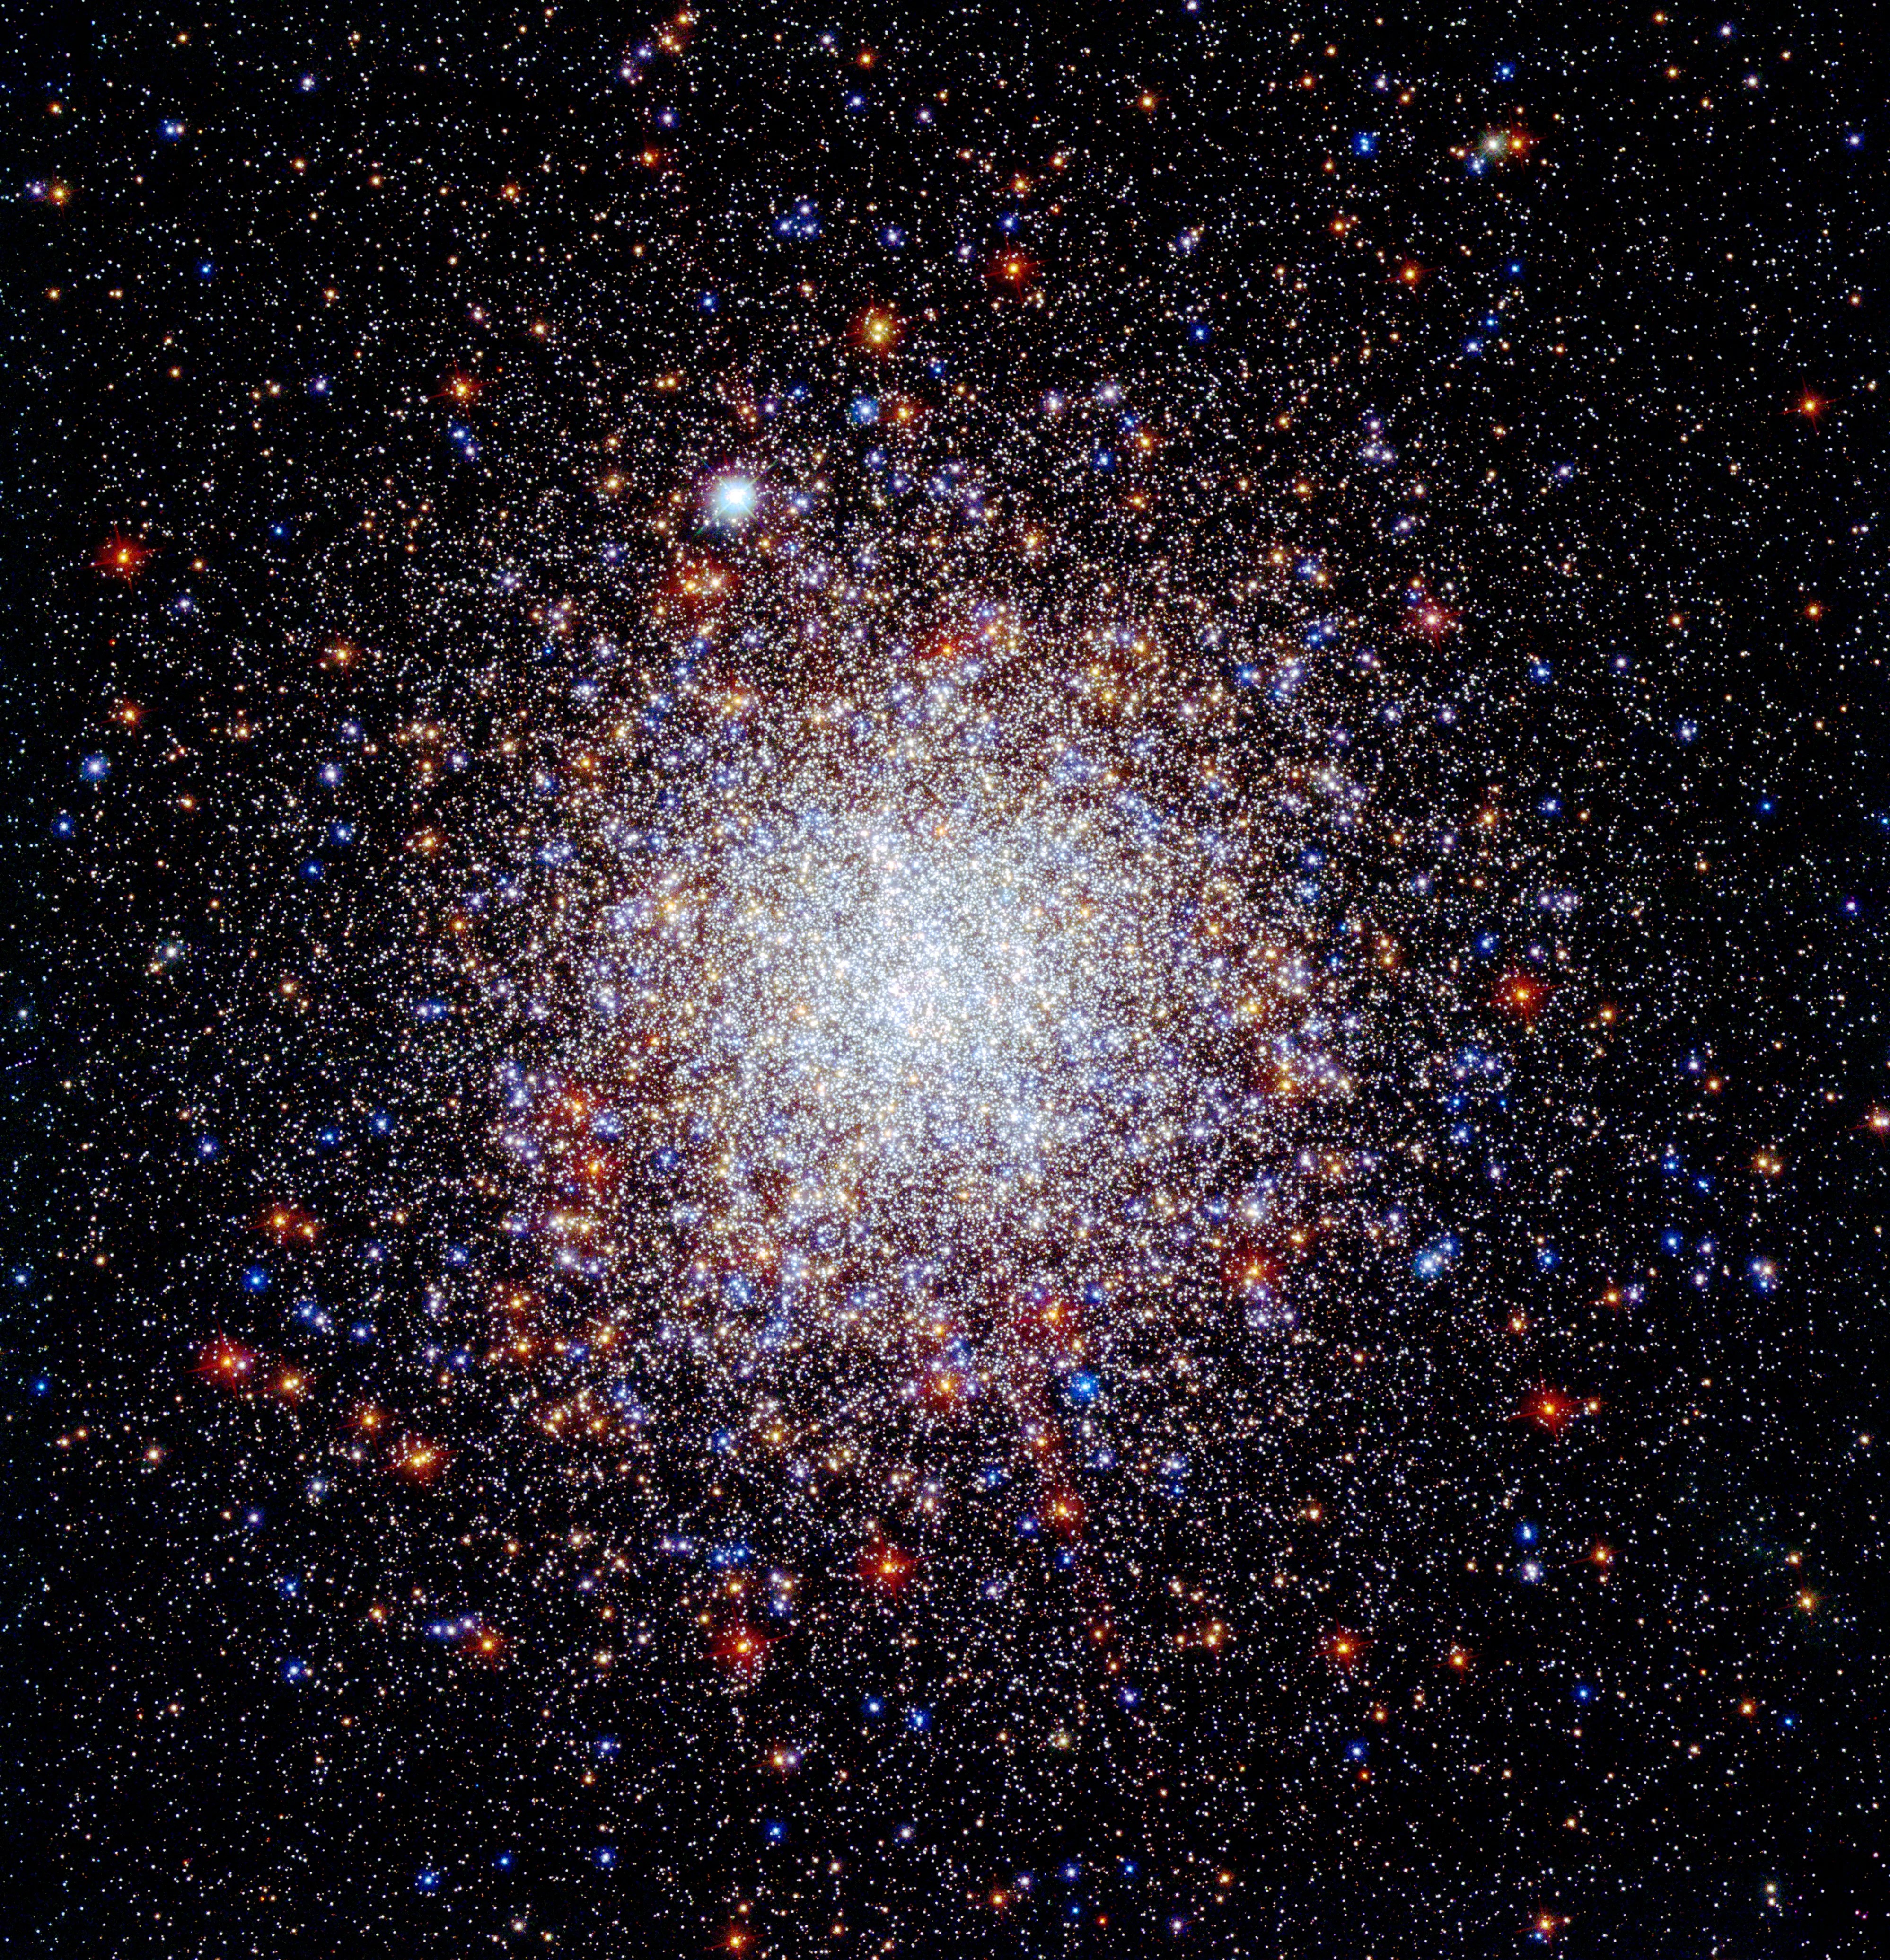 The nearly spherical globular star cluster Caldwell 84 is dense and thick with stars. Whiter stars appear near the center and blue and red stars farther out.